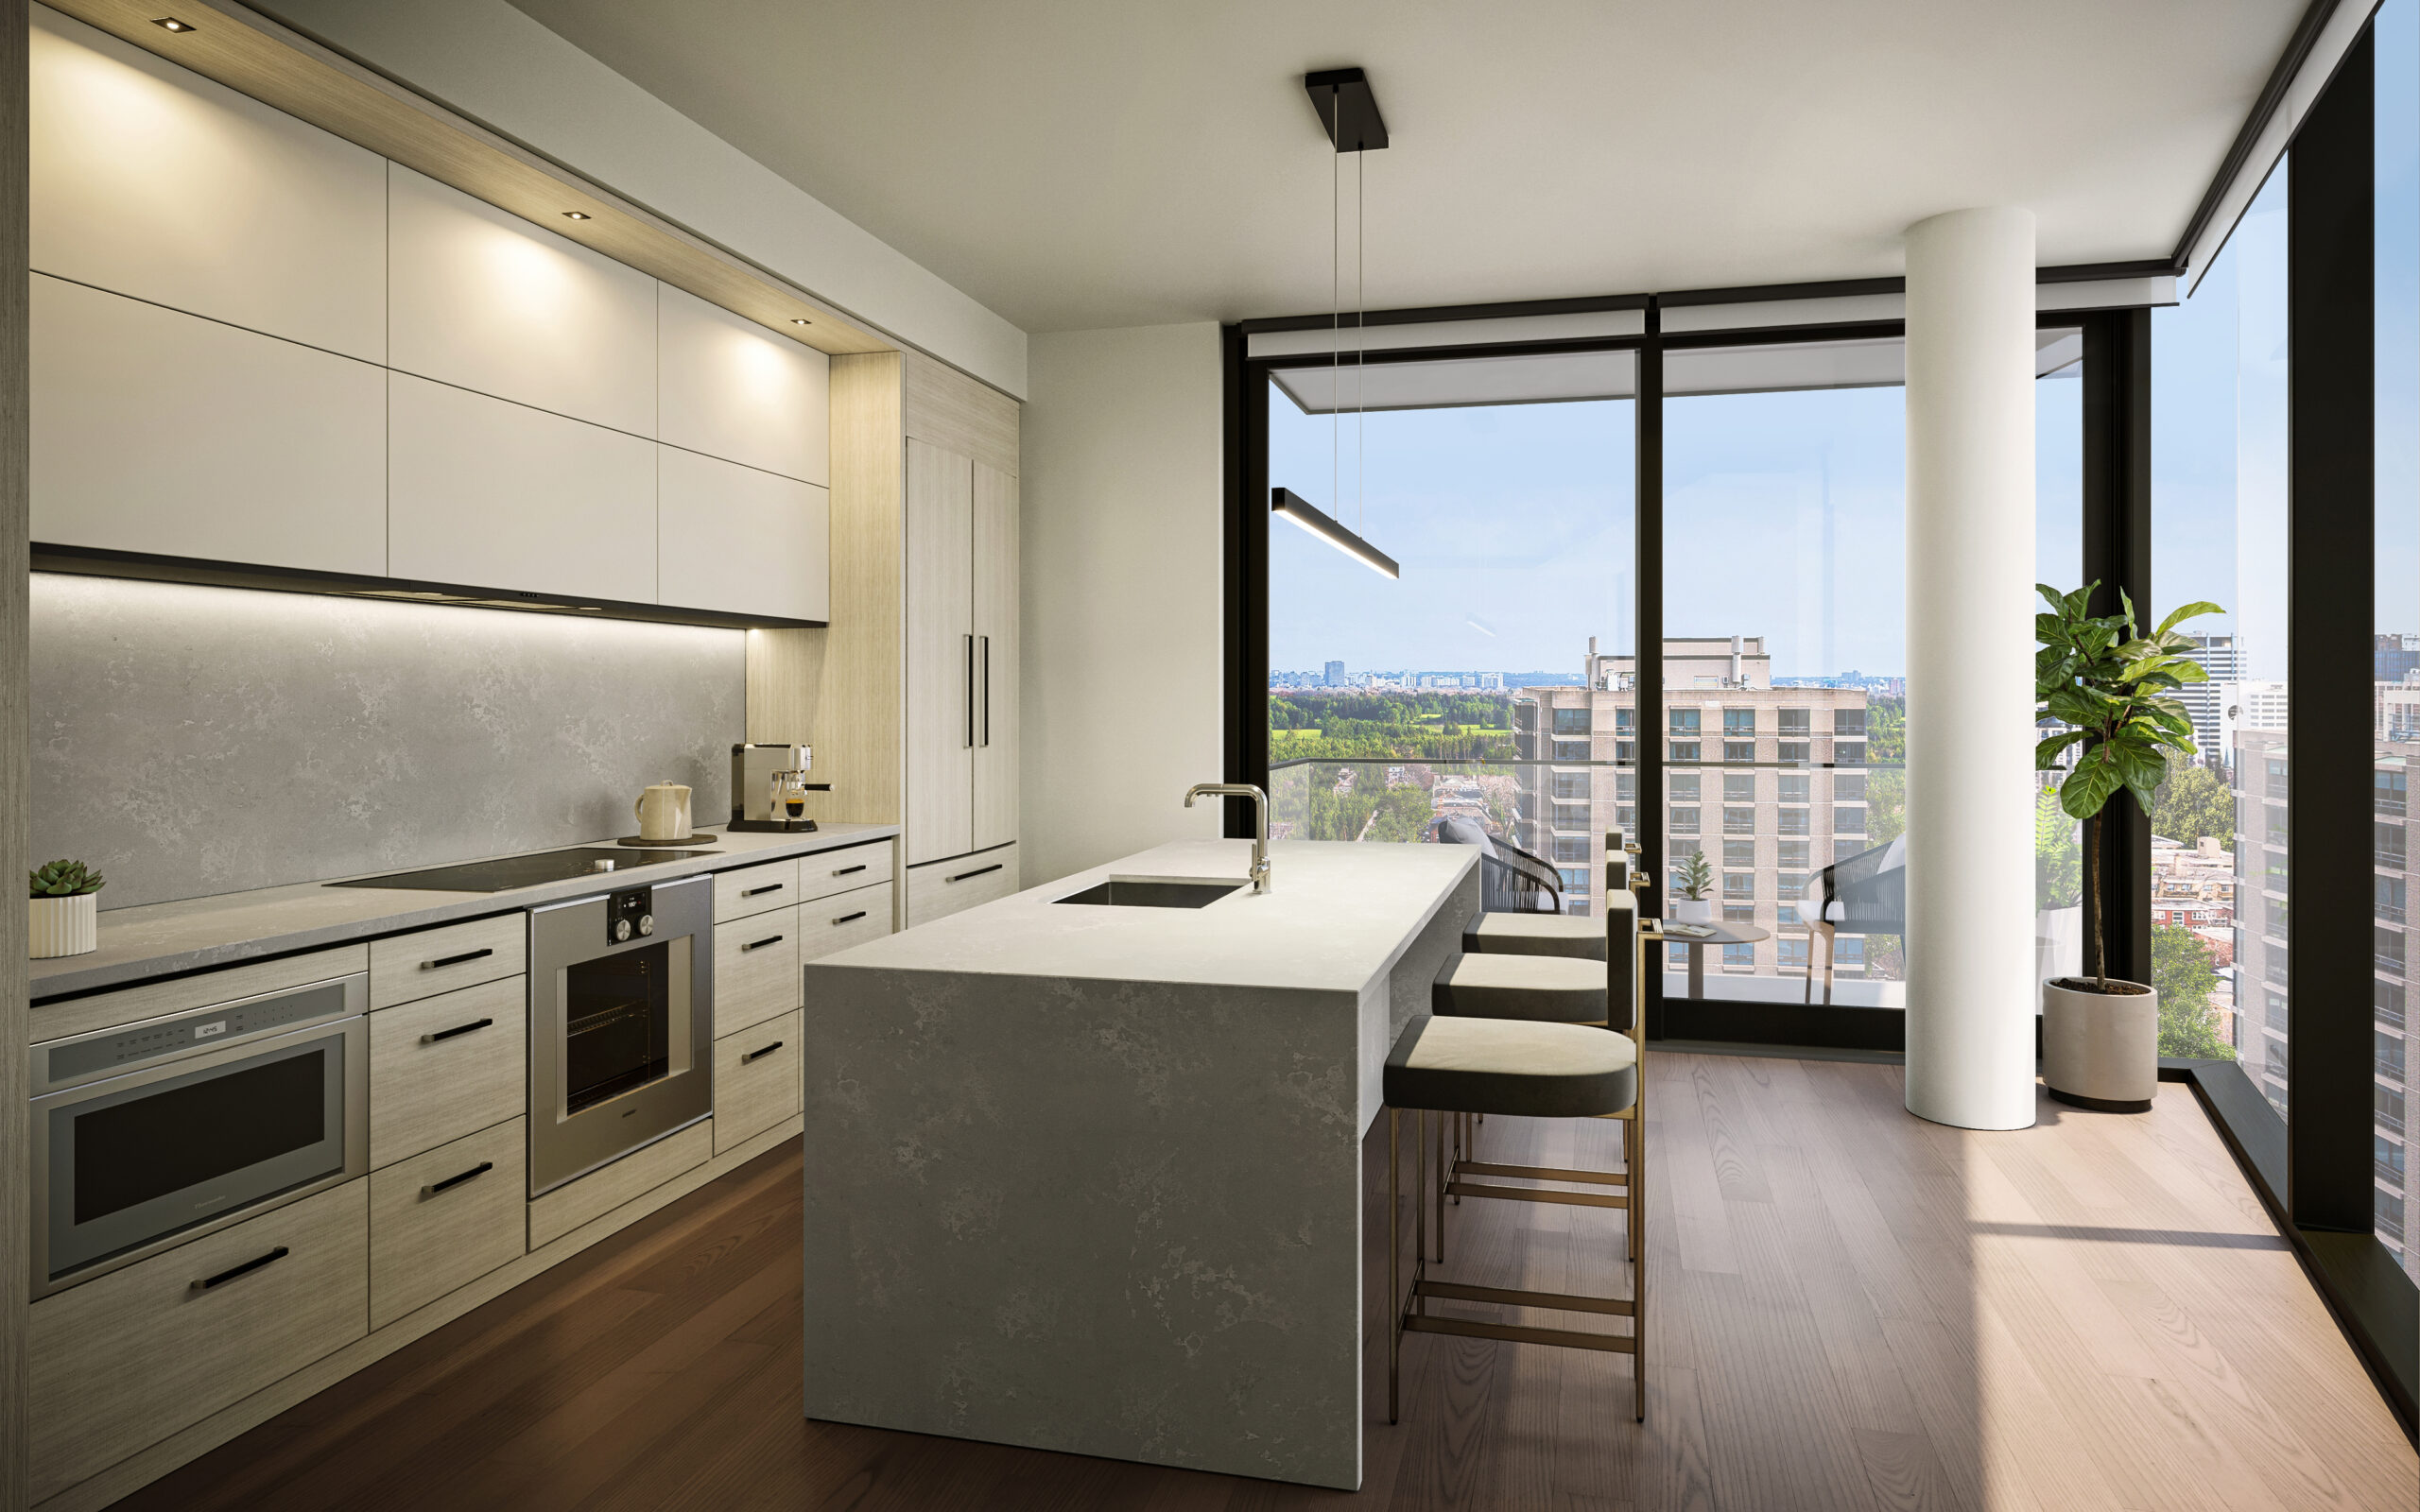 A kitchen in a 2Fifteen suite, Toronto's new luxury apartment building